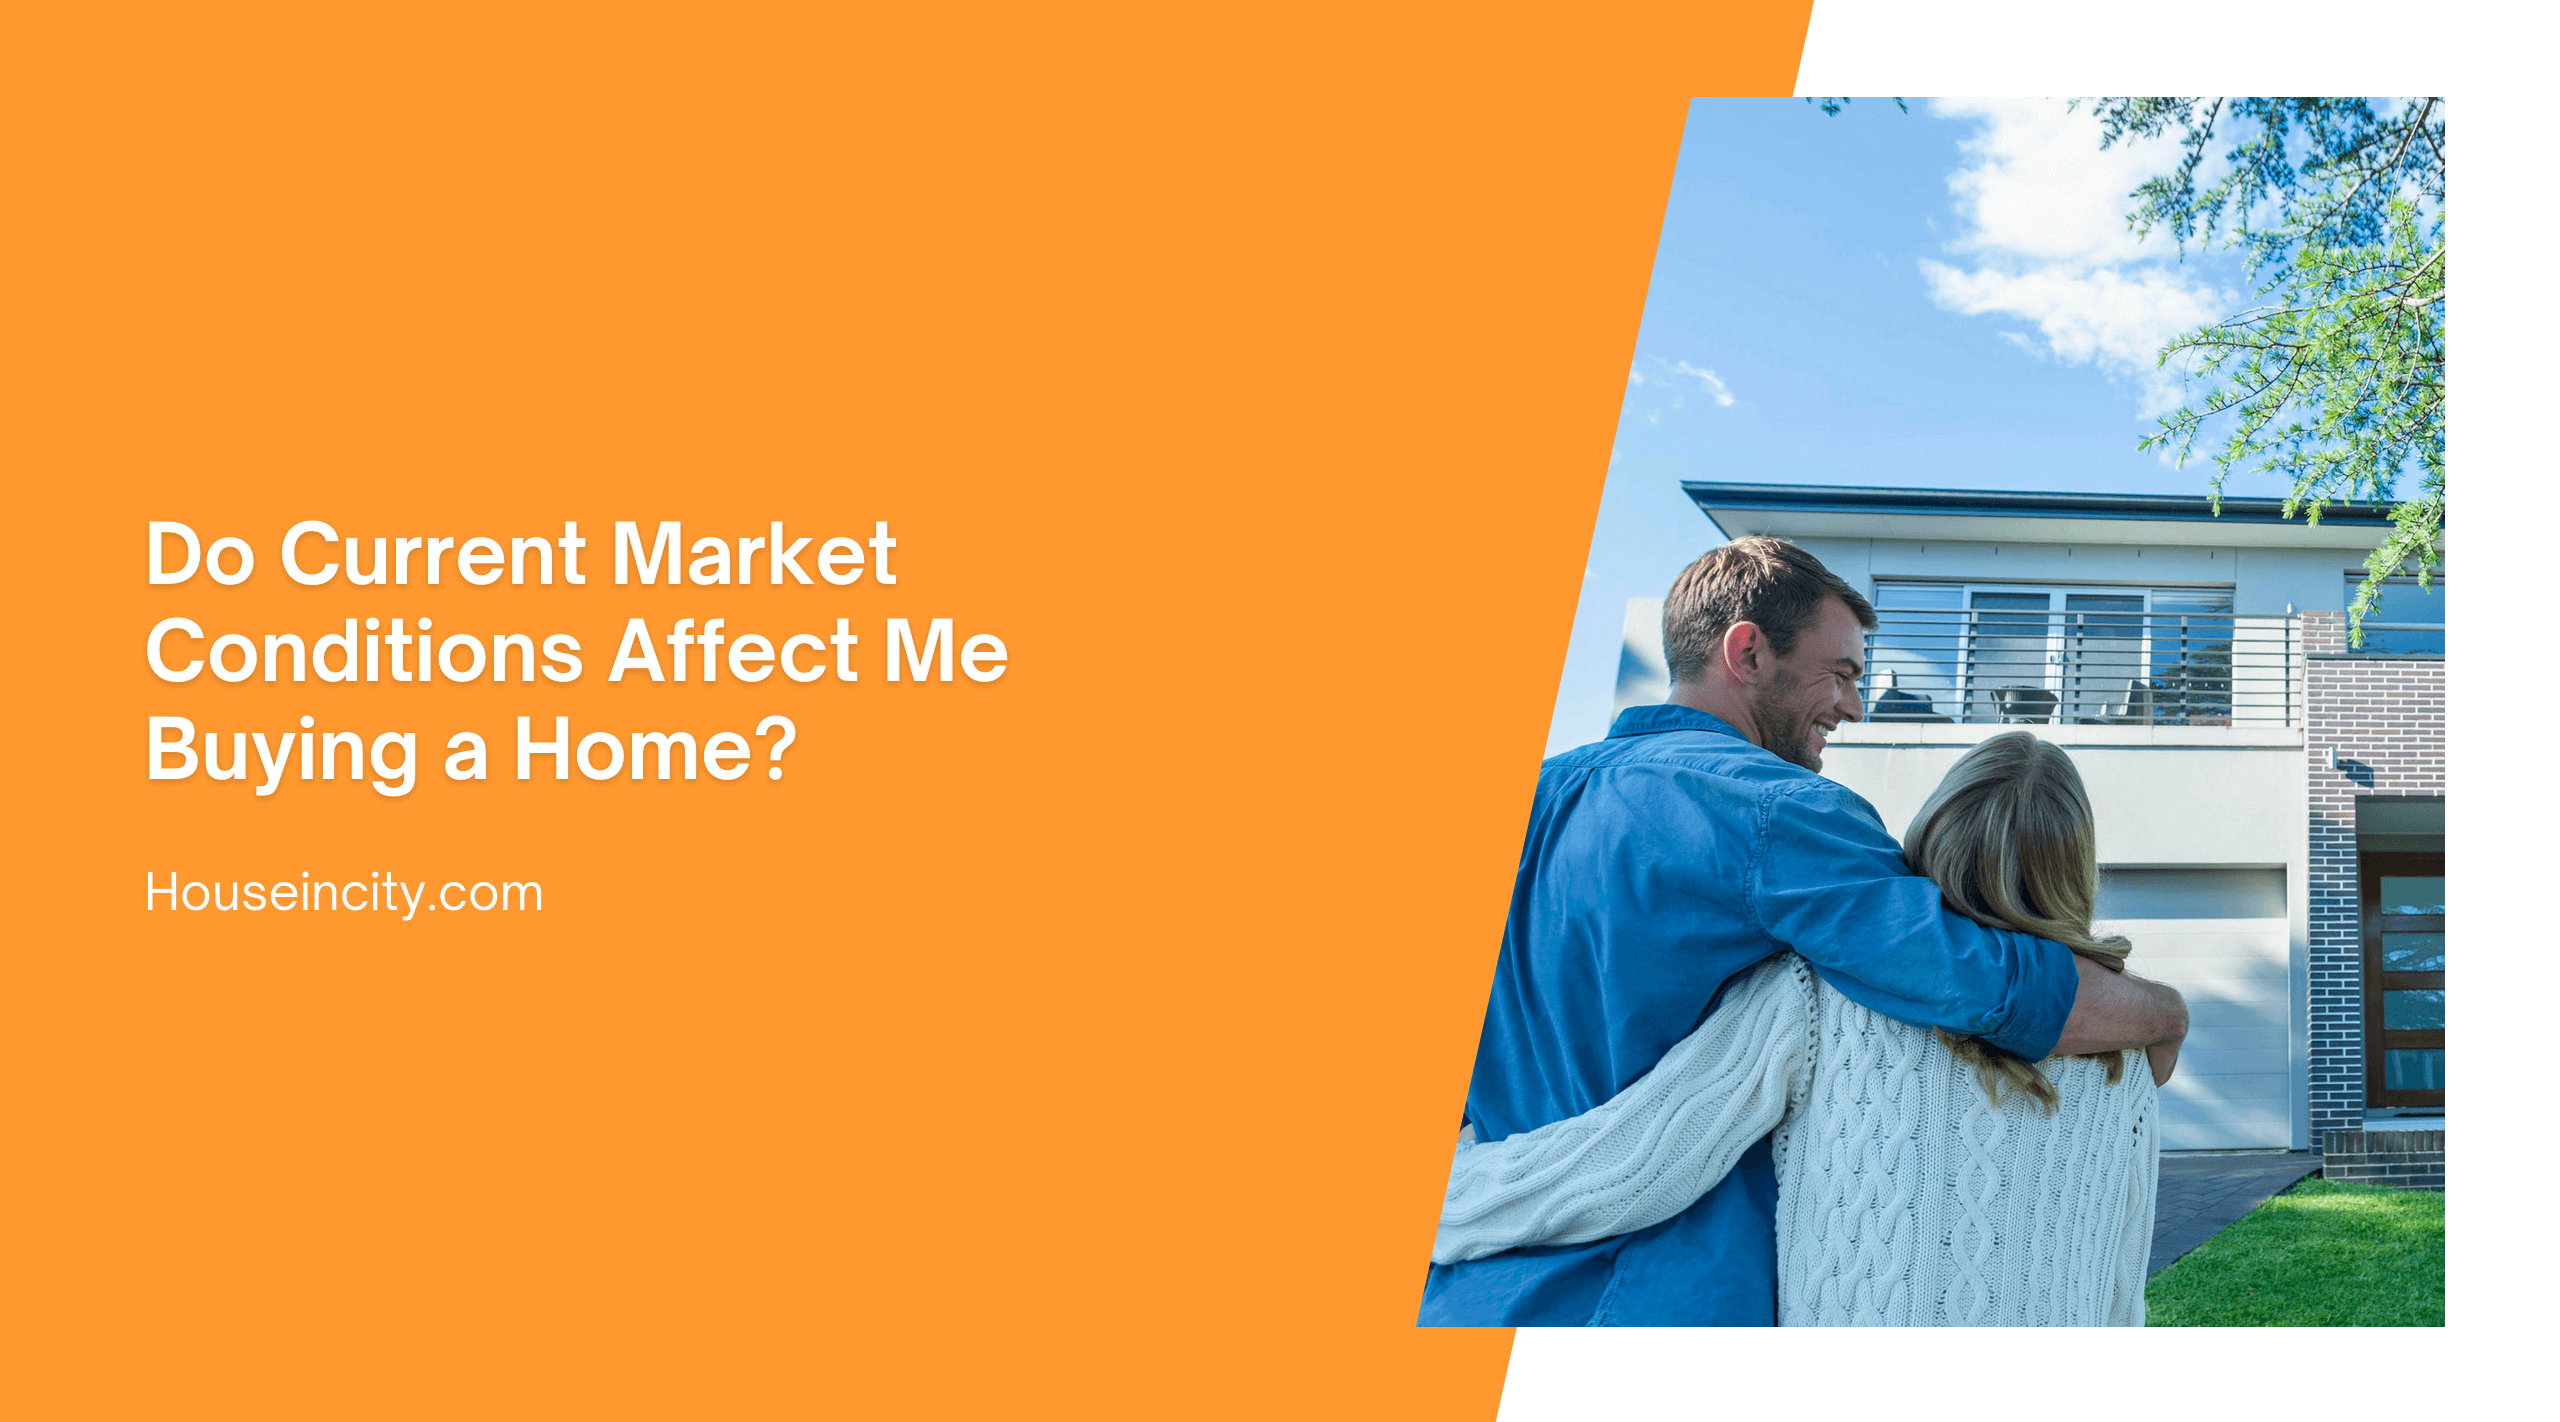 Do Current Market Conditions Affect Me Buying a Home?